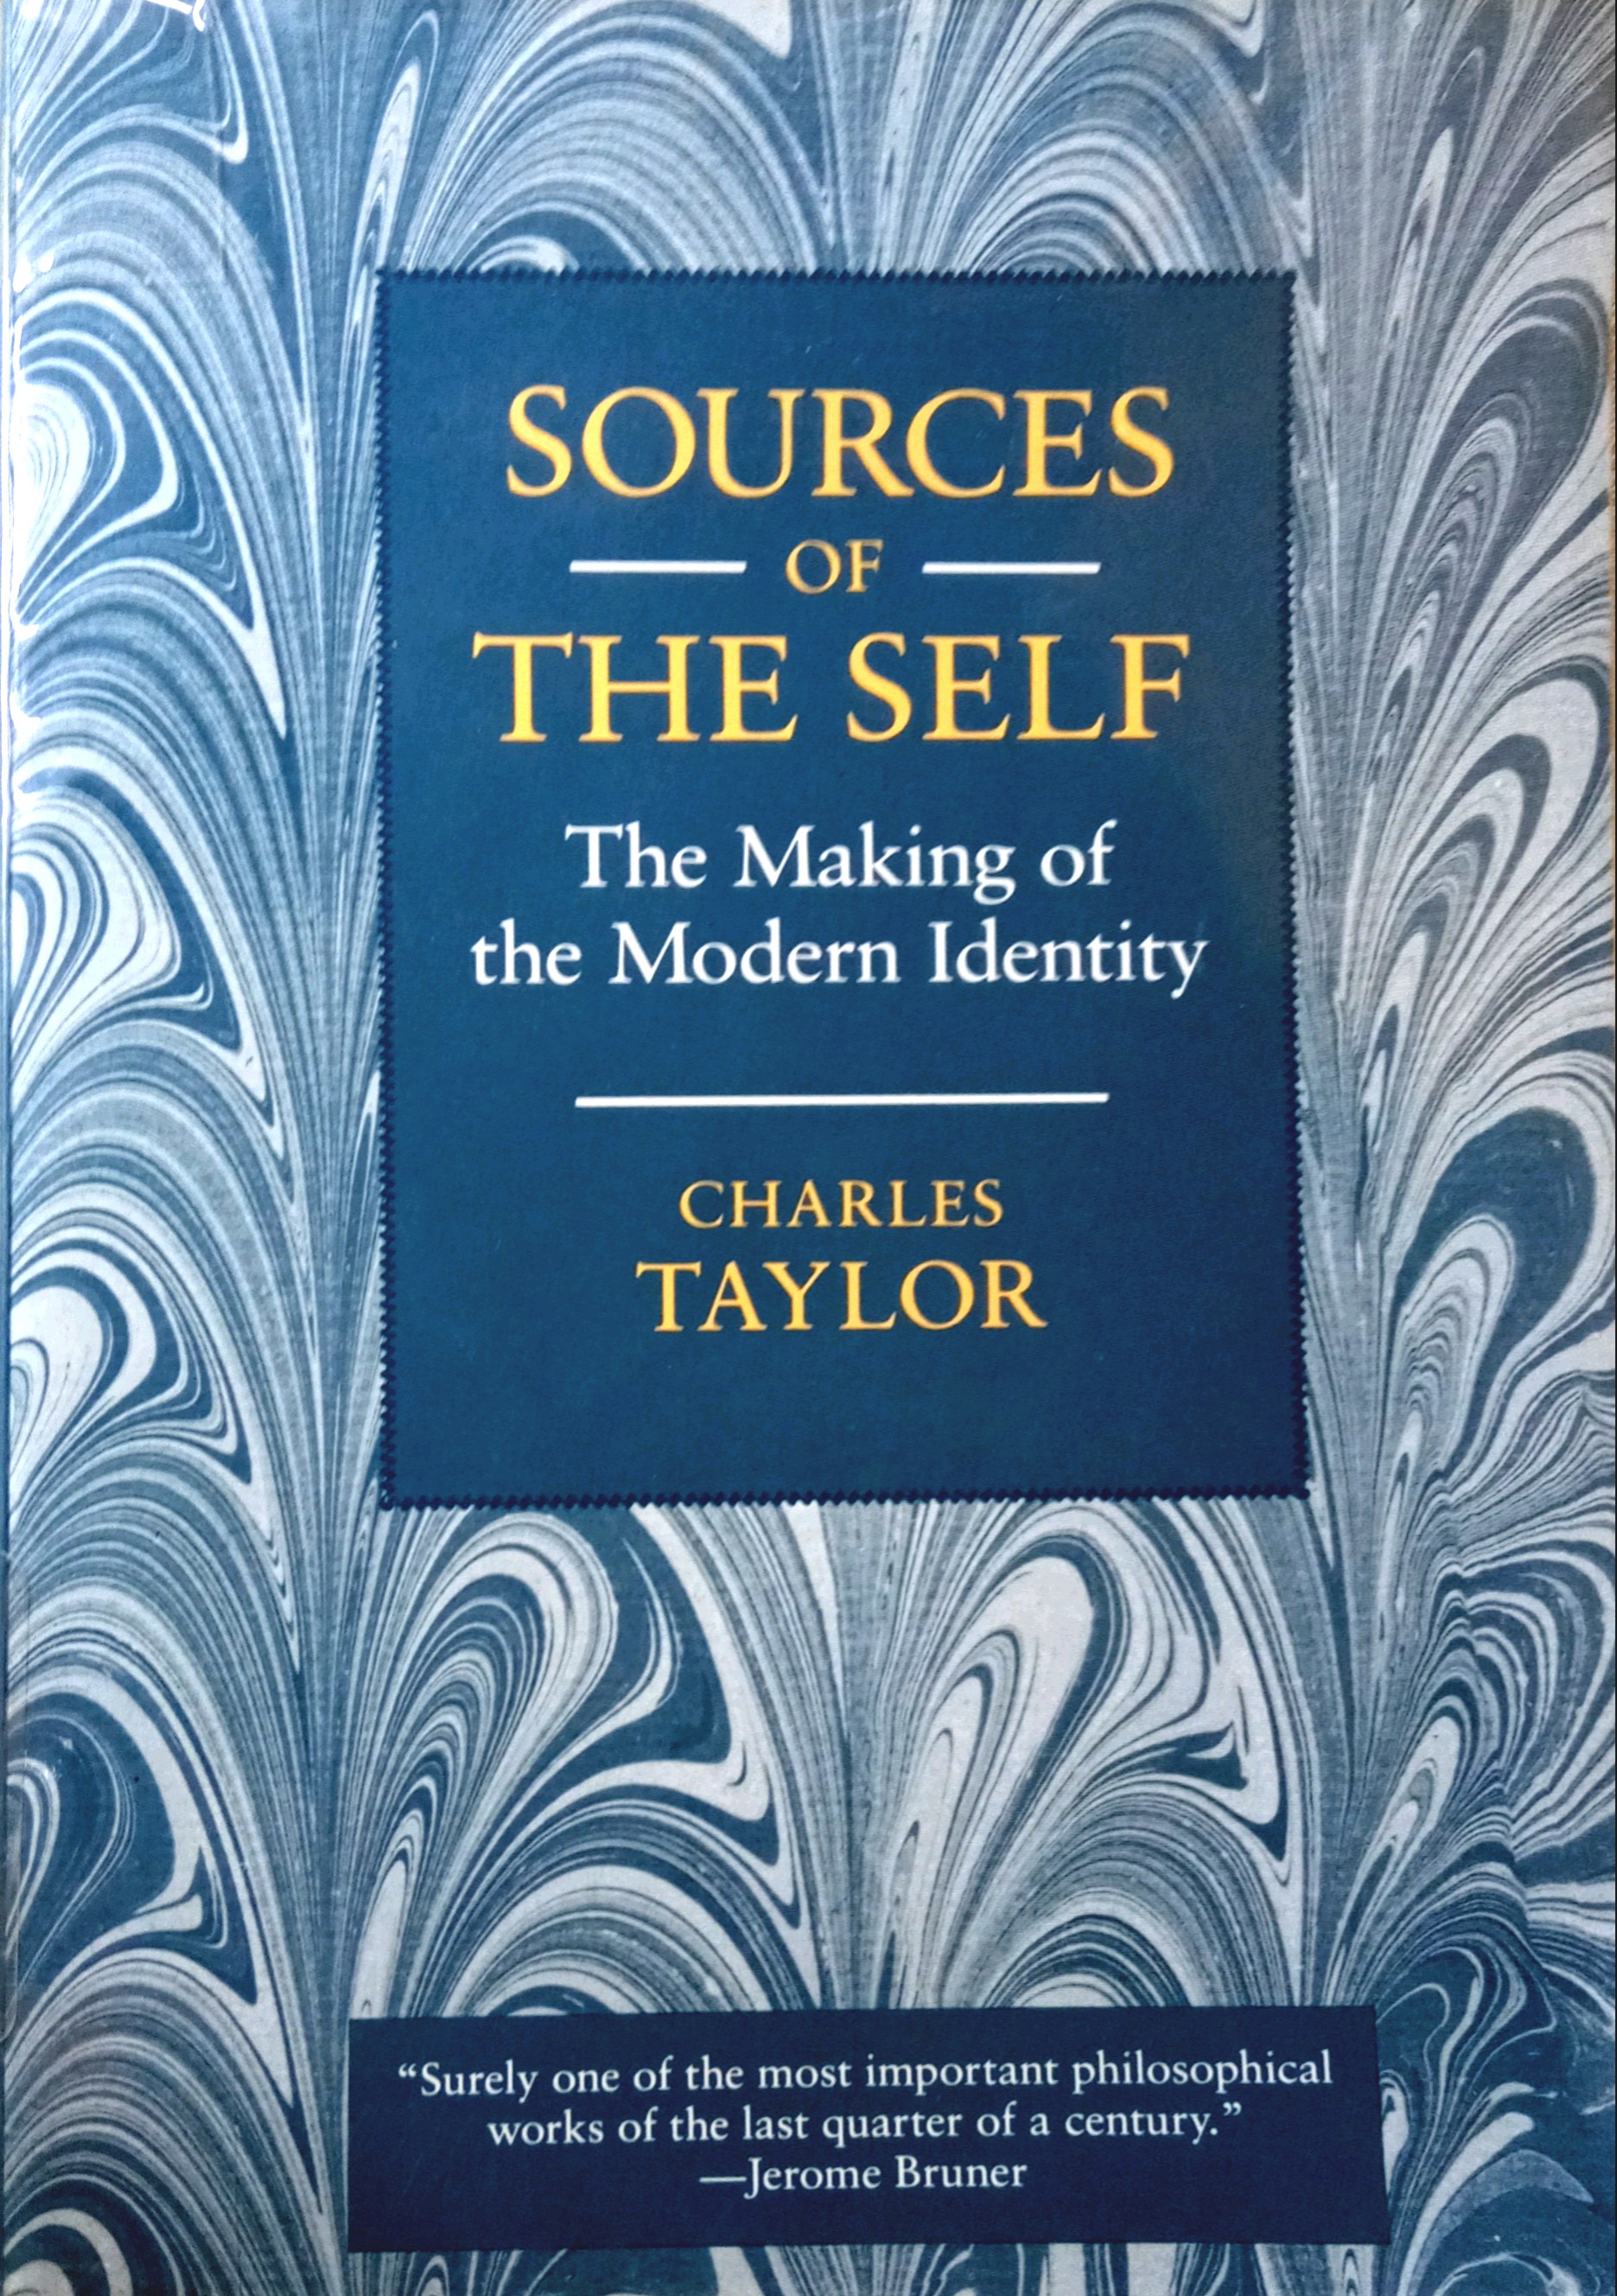 SOURCES OF THE SELF